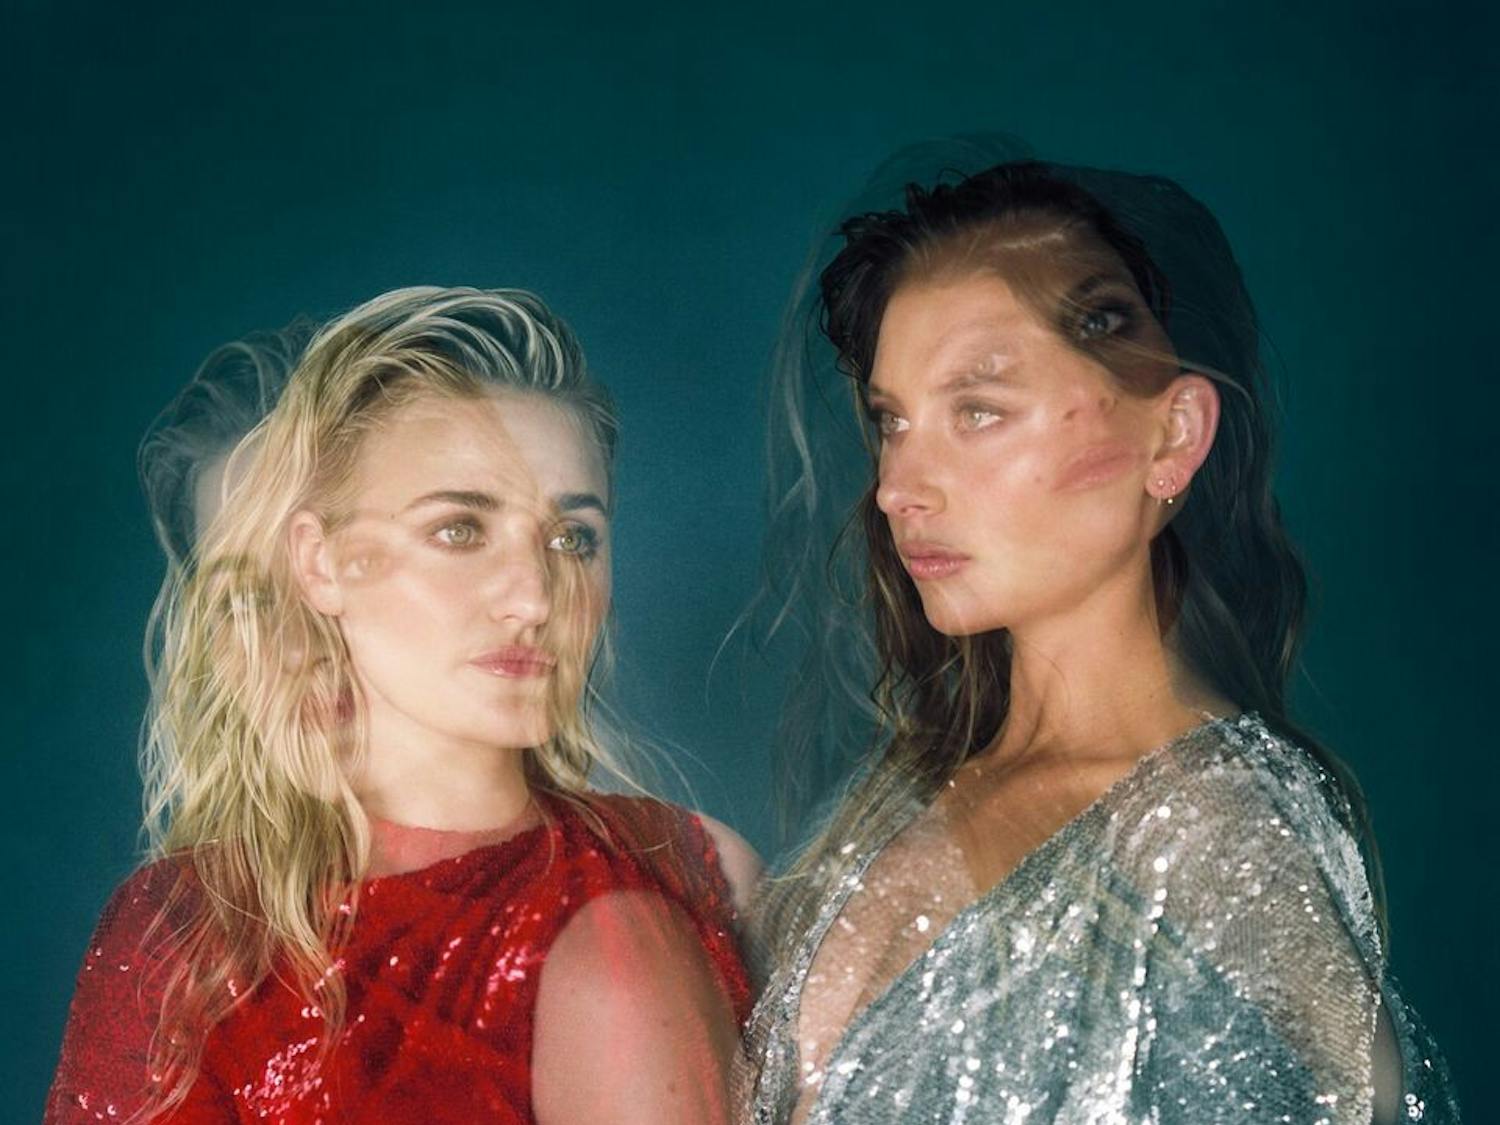 Pop rock duo Aly & AJ just hit the road on their Promises Tour. The group talked with The Spectrum about their Disney past, struggles in the music industry and what to expect from their upcoming EP.